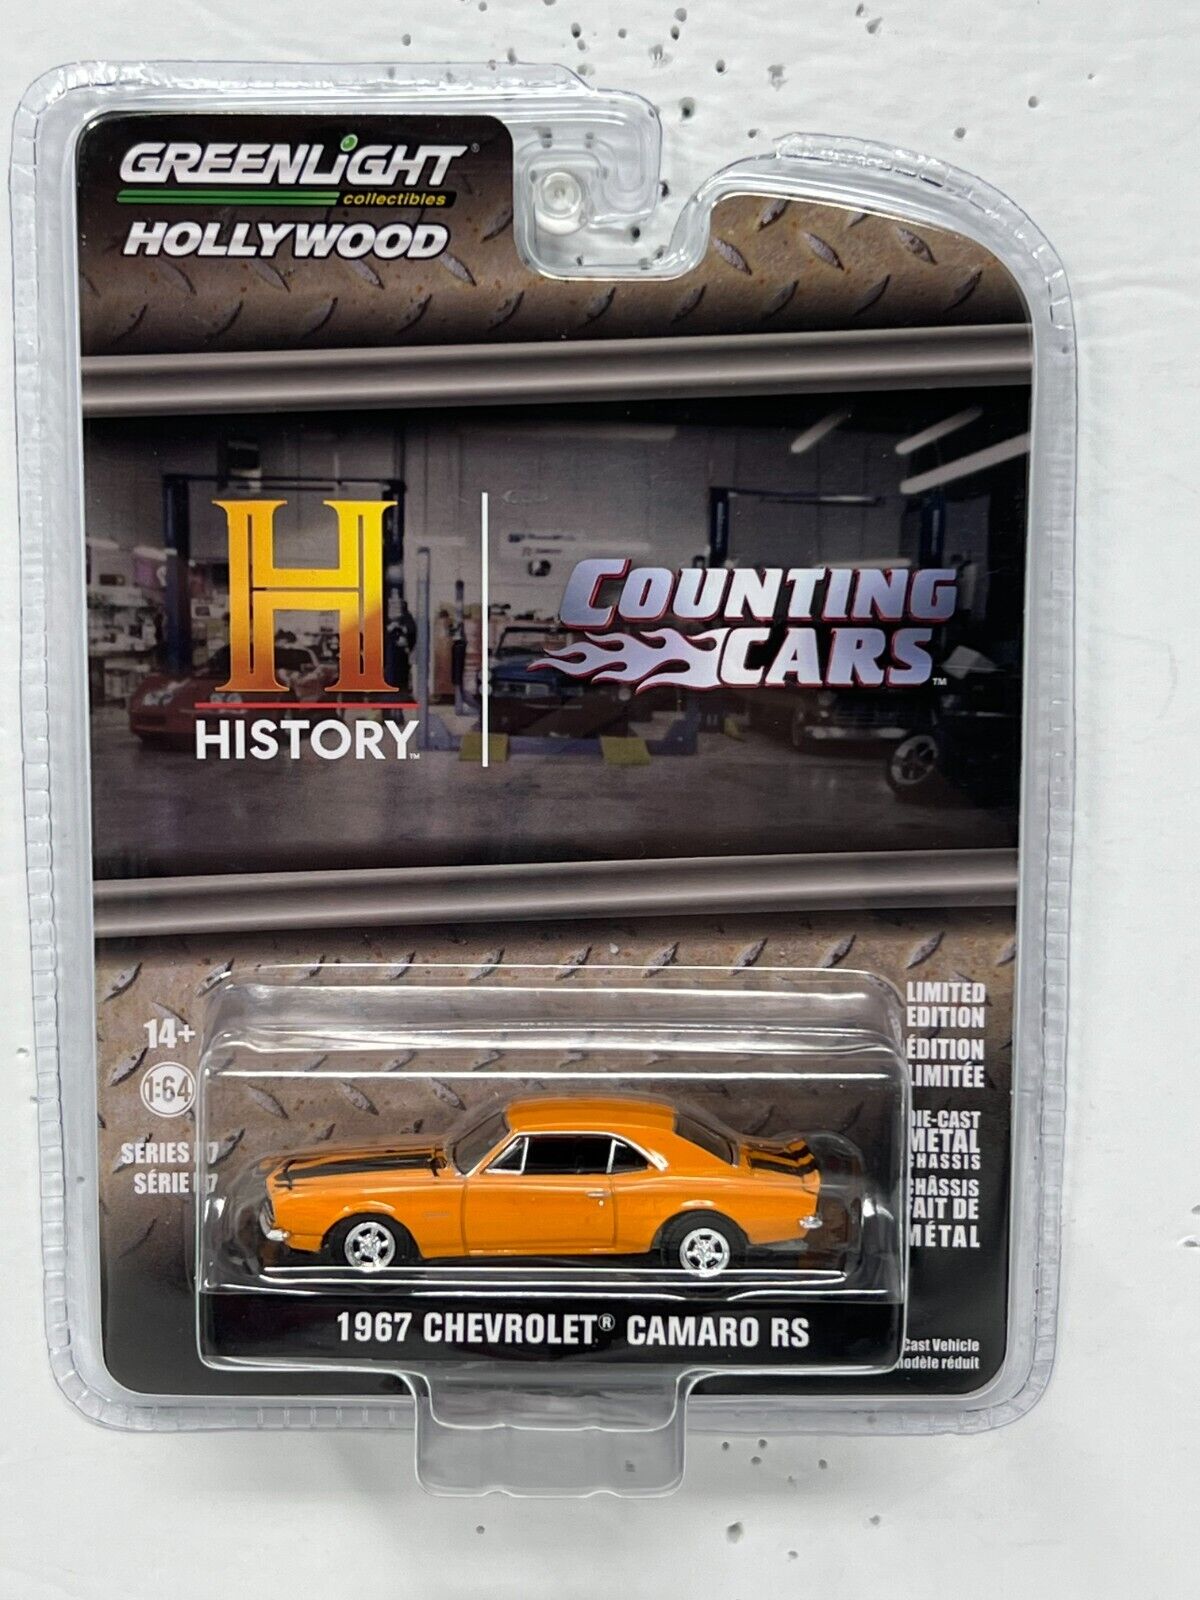 Greenlight Hollywood History Counting Cars 1967 Chevrolet Camaro RS 1:64 Diecast